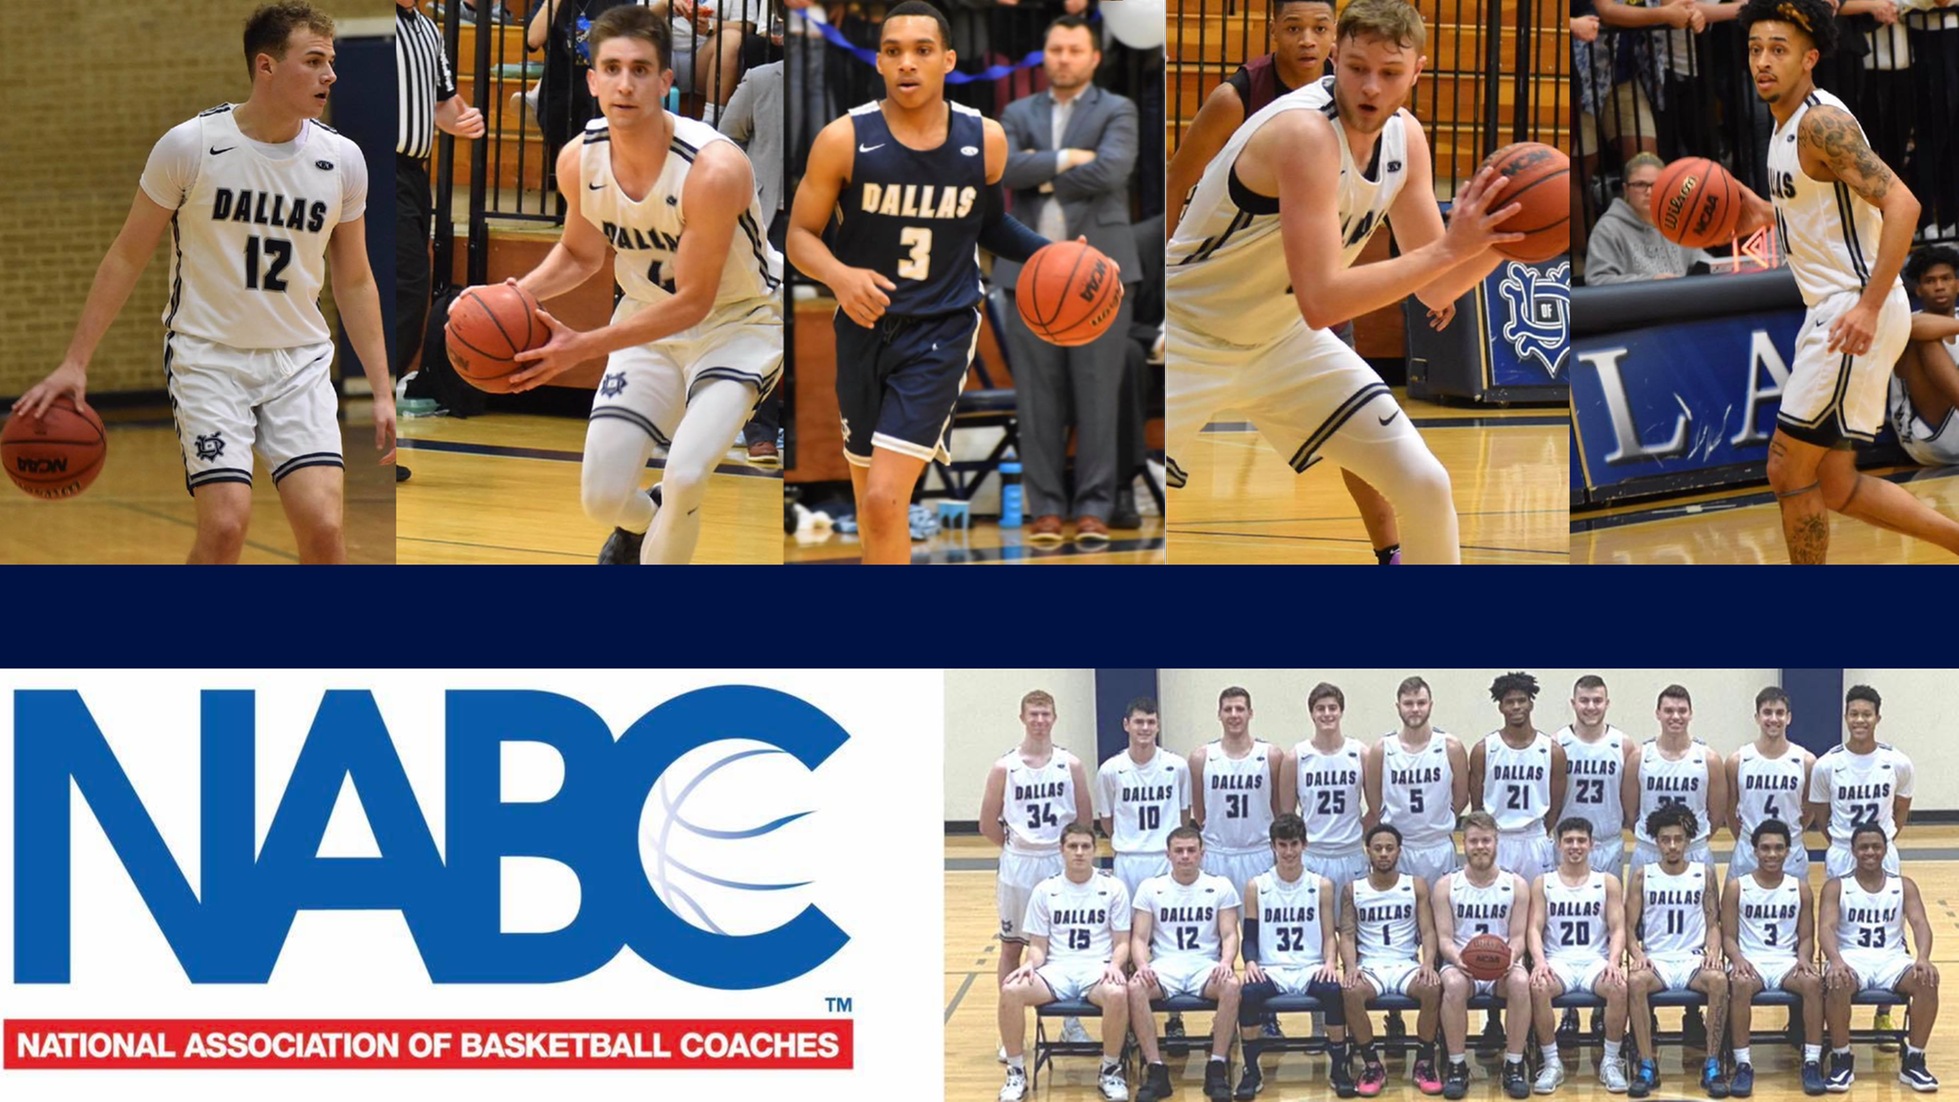 2019-20 UD Men's Basketball Awarded Team Academic Excellence Award; 5 Named to NABC Honors Court